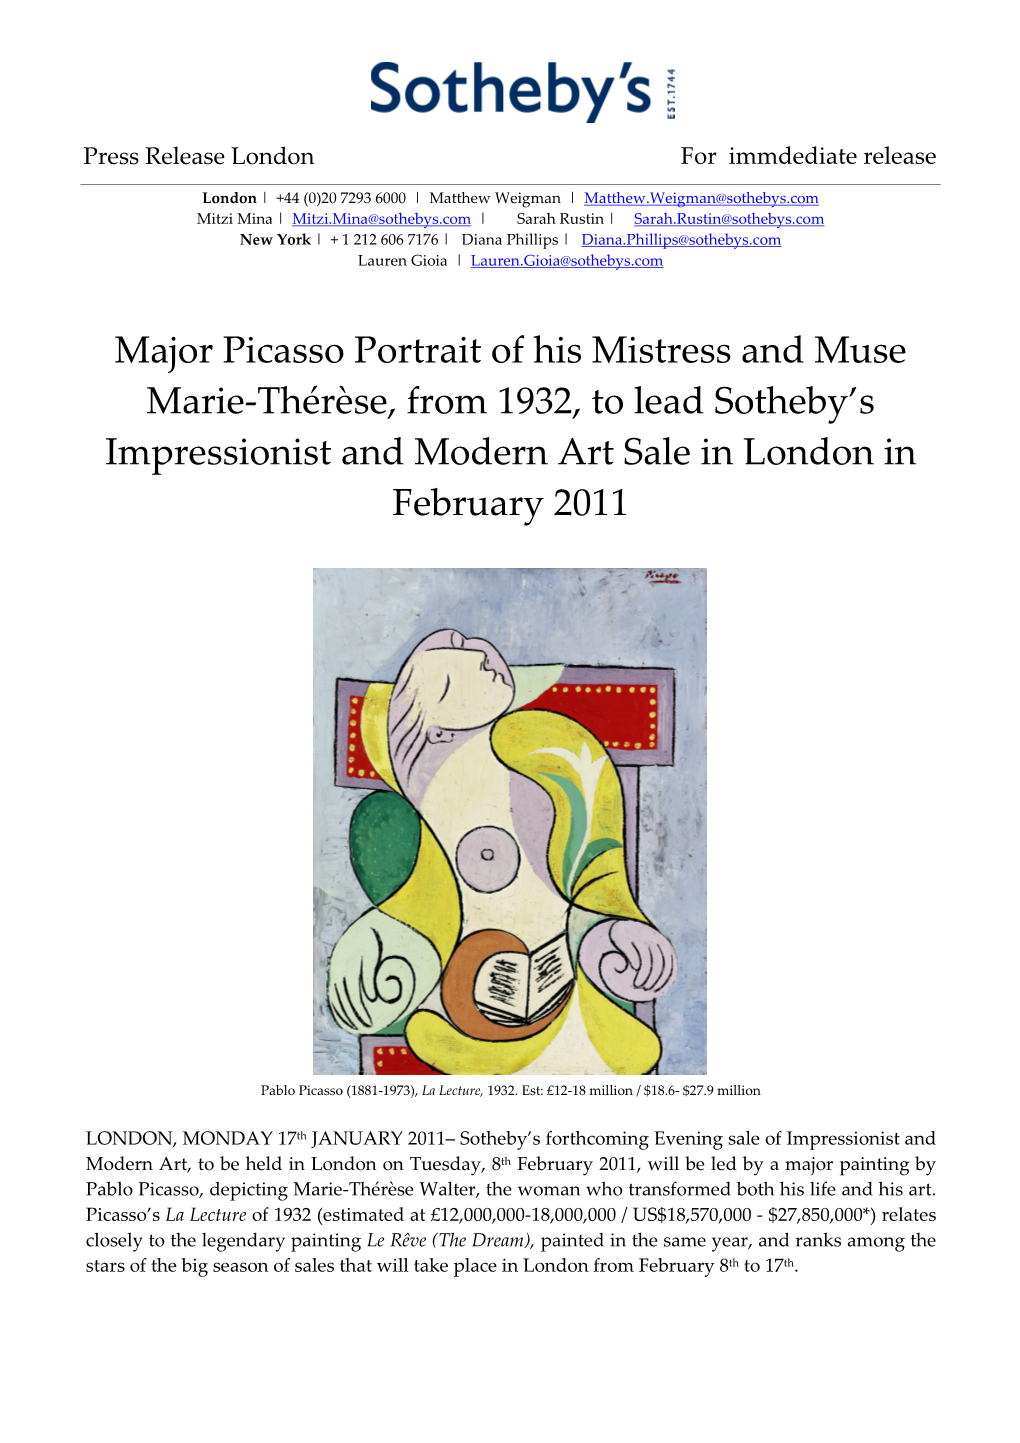 Major Picasso Portrait of His Mistress and Muse Marie-Thérèse, from 1932, to Lead Sotheby’S Impressionist and Modern Art Sale in London in February 2011